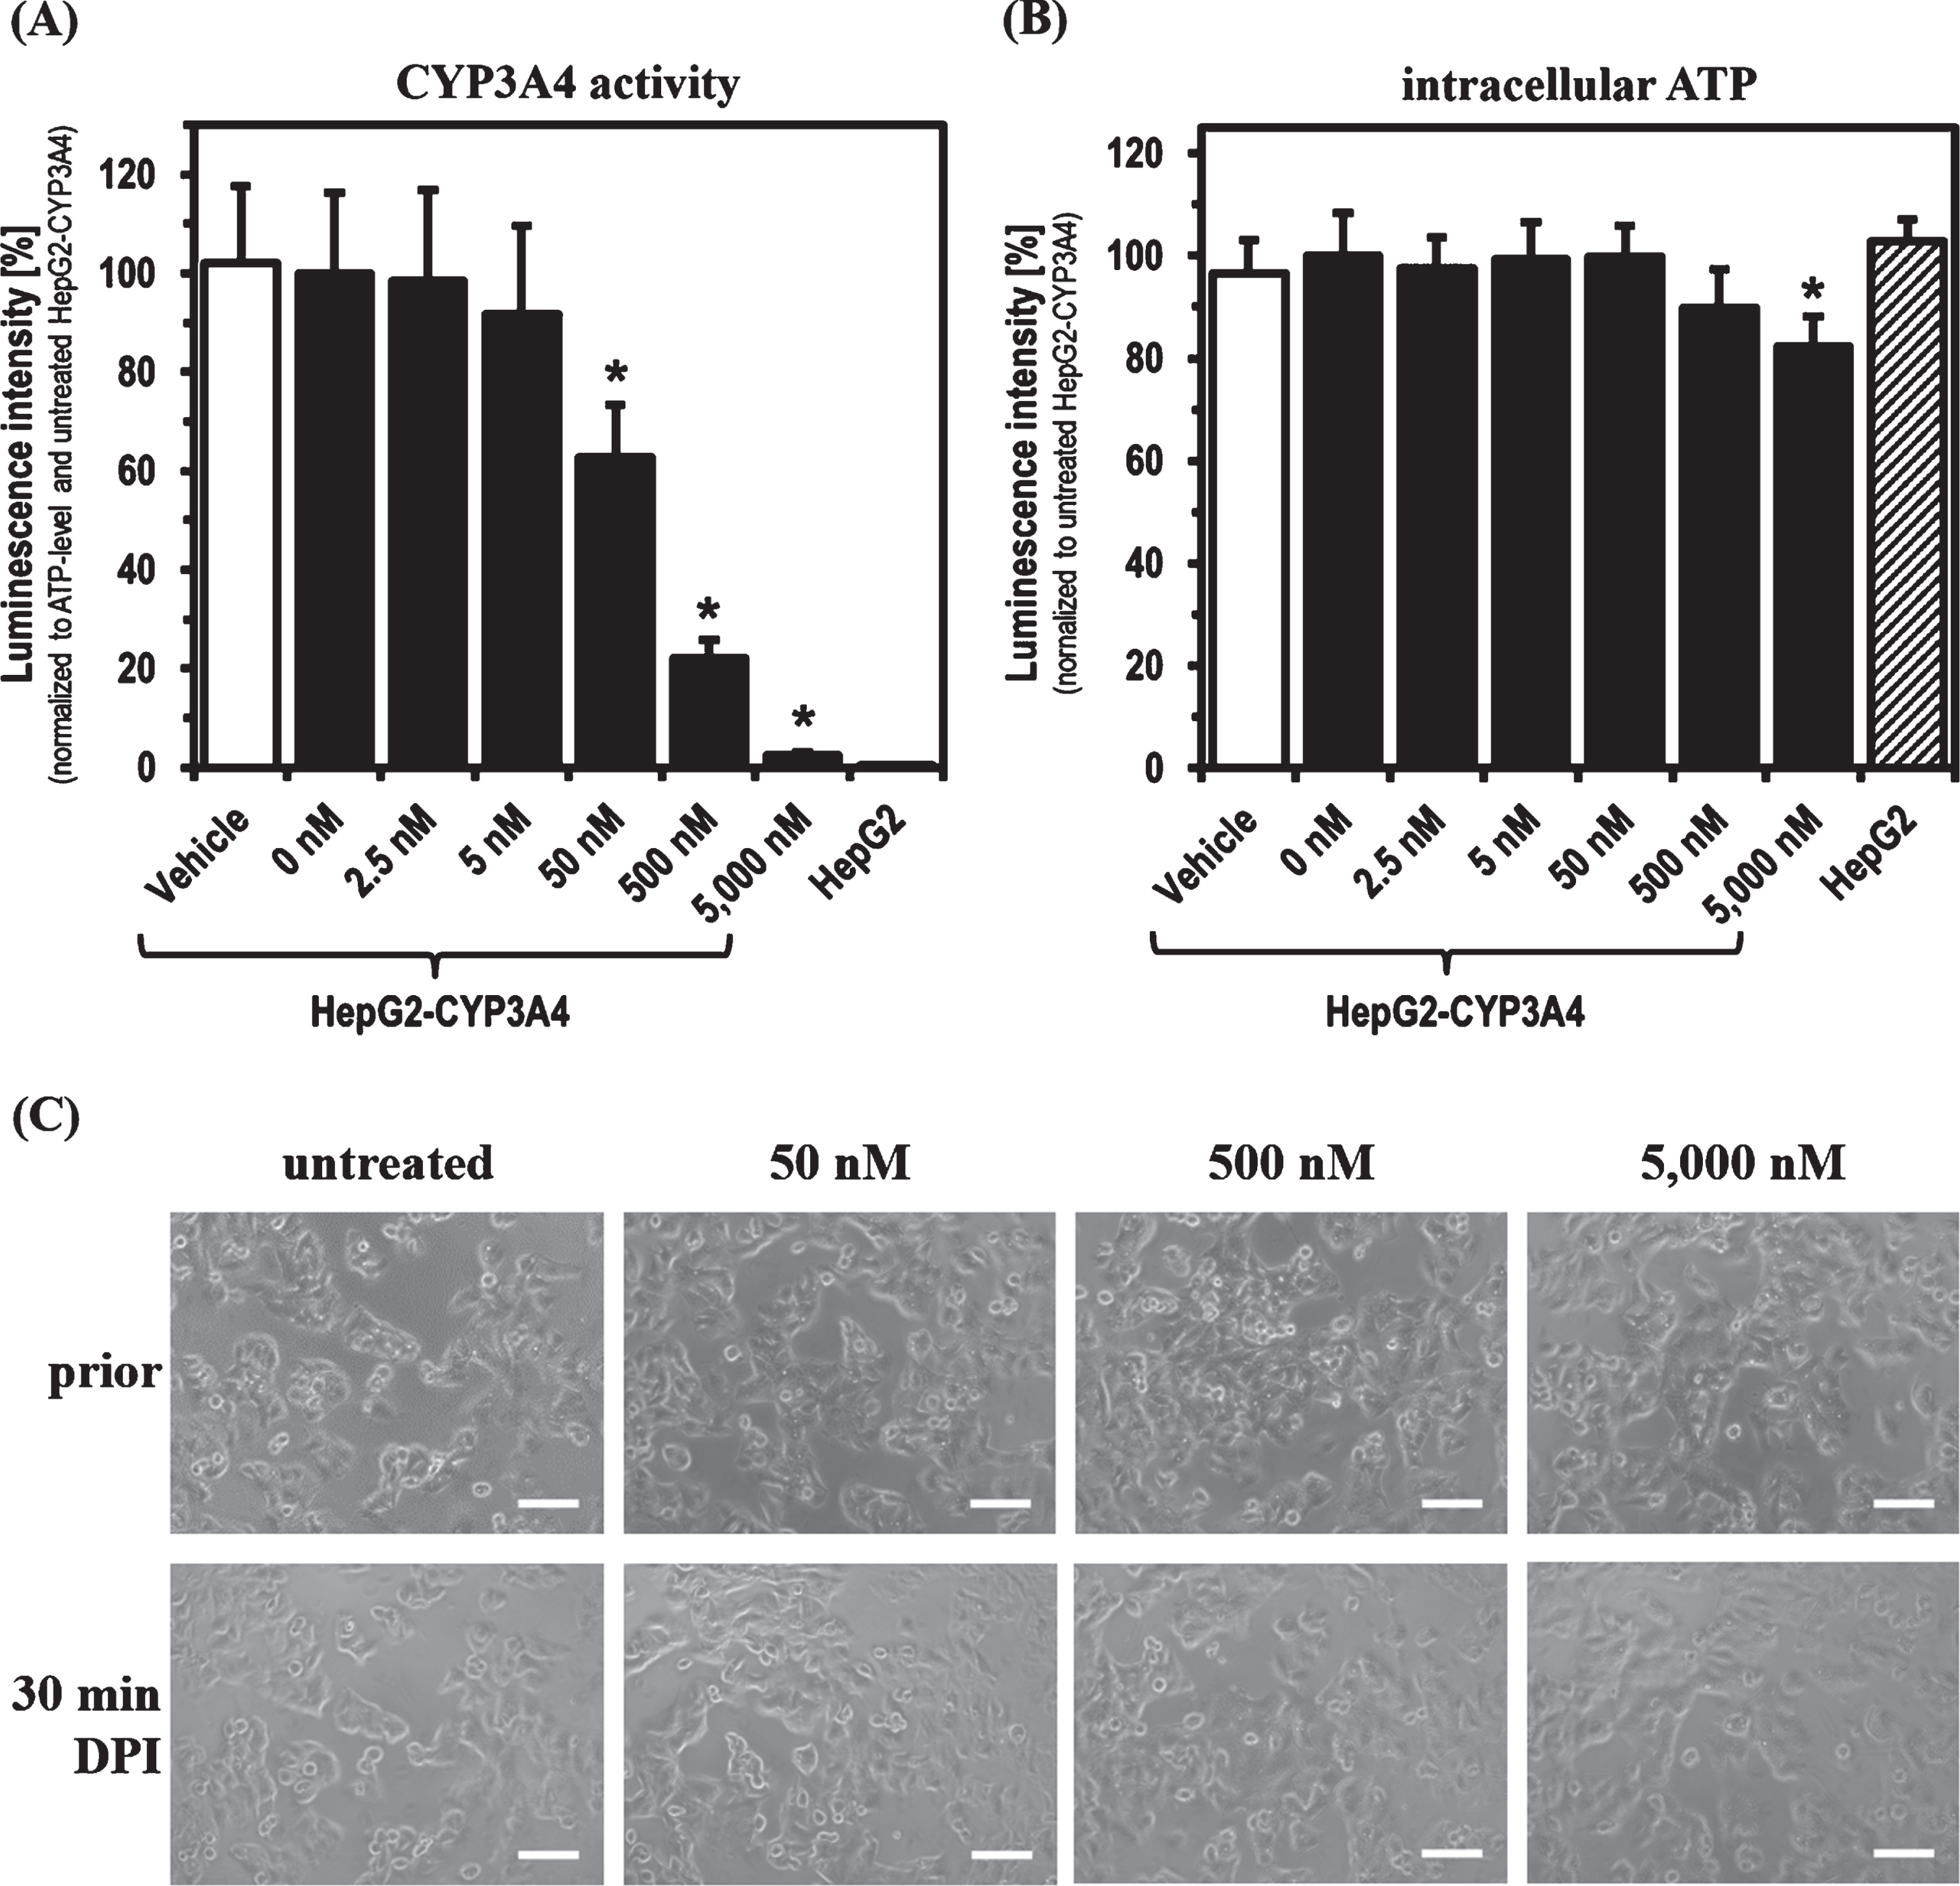 CYP3A4 activity and ATP level after 30 min DPI treatment. Determination of (A) CYP3A4 activity, (B) intracellular ATP level and (C) morphology of HepG2-CYP3A4 after 30 min DPI treatment (Mean±standard deviation; *p < 0.05 compared to untreated cells; n = 6 from two independent experiments; pictures taken by light microscope in phase contrast mode with 10-fold primary magnification; scale: 100μm).